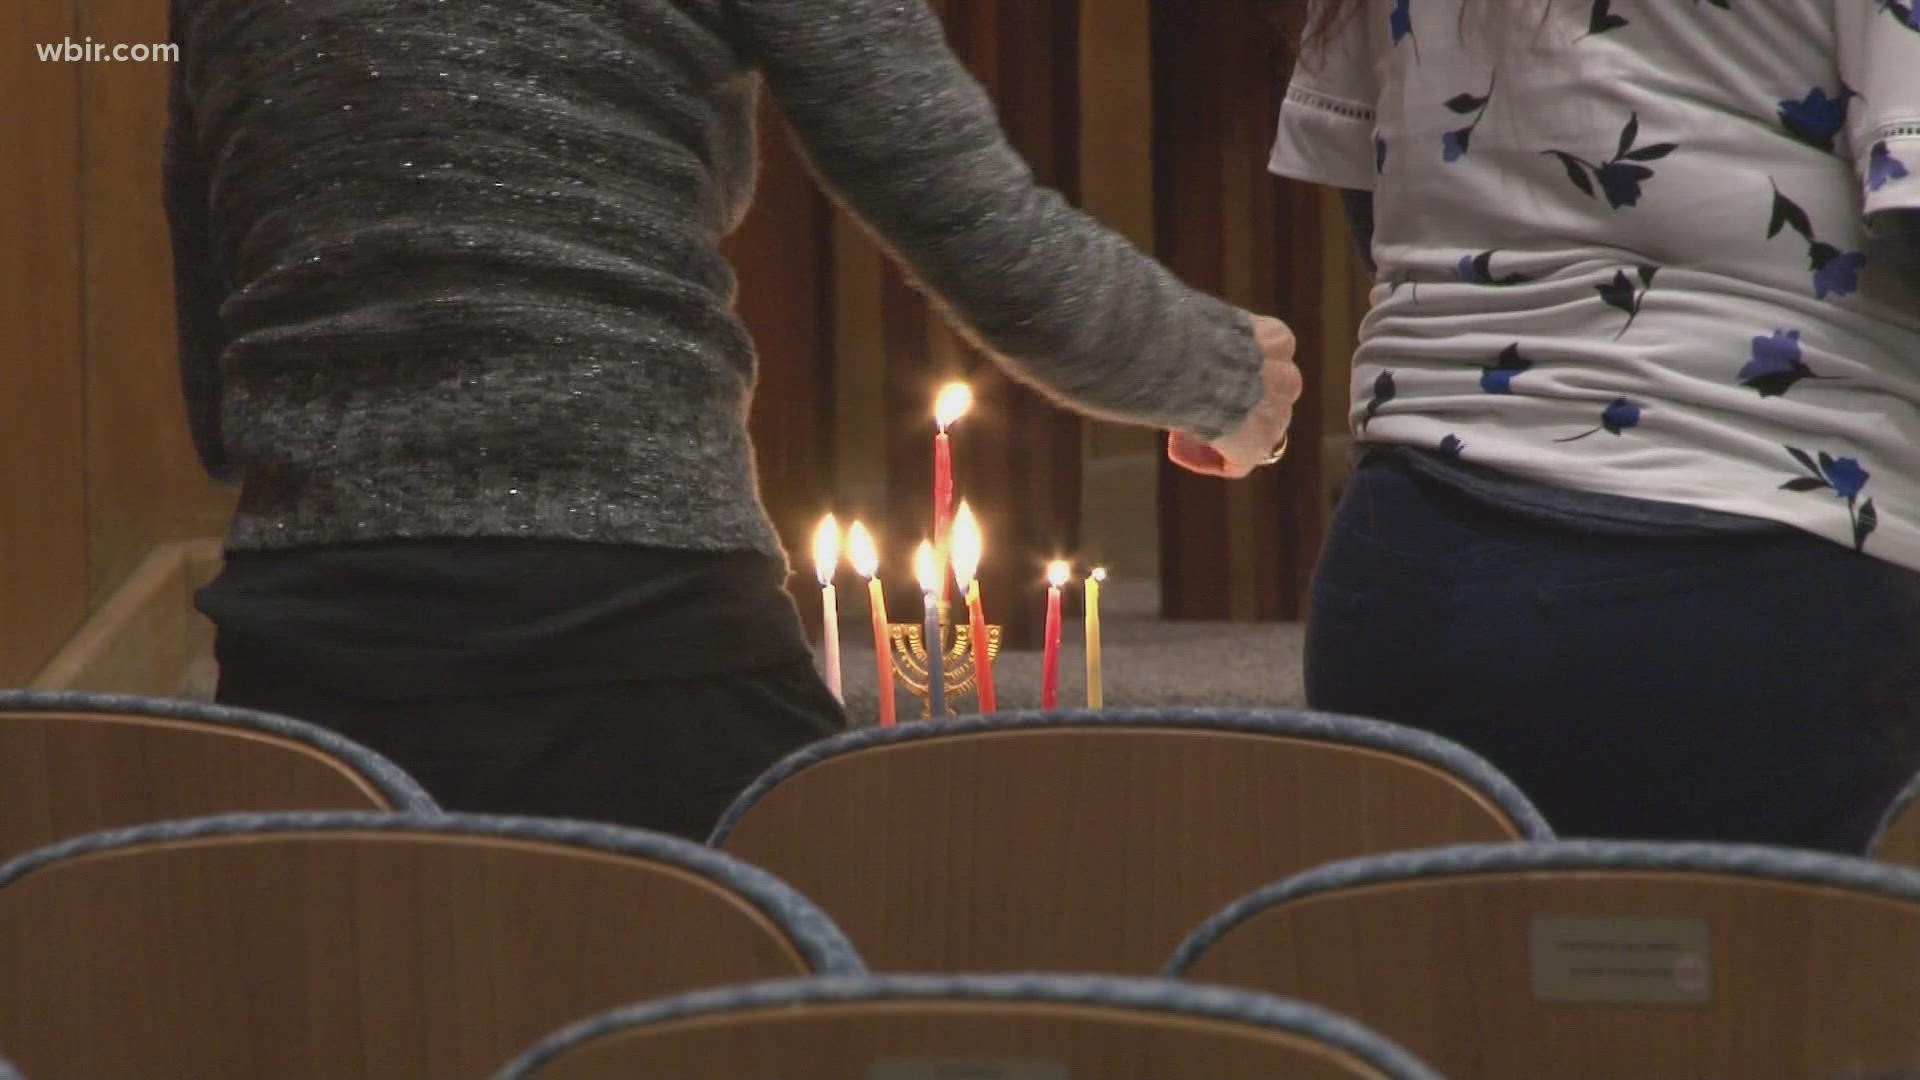 Hanukkah will last until December 6 and on Friday, families gathered at Temple Beth El for Shabbat, the Jewish day of rest.